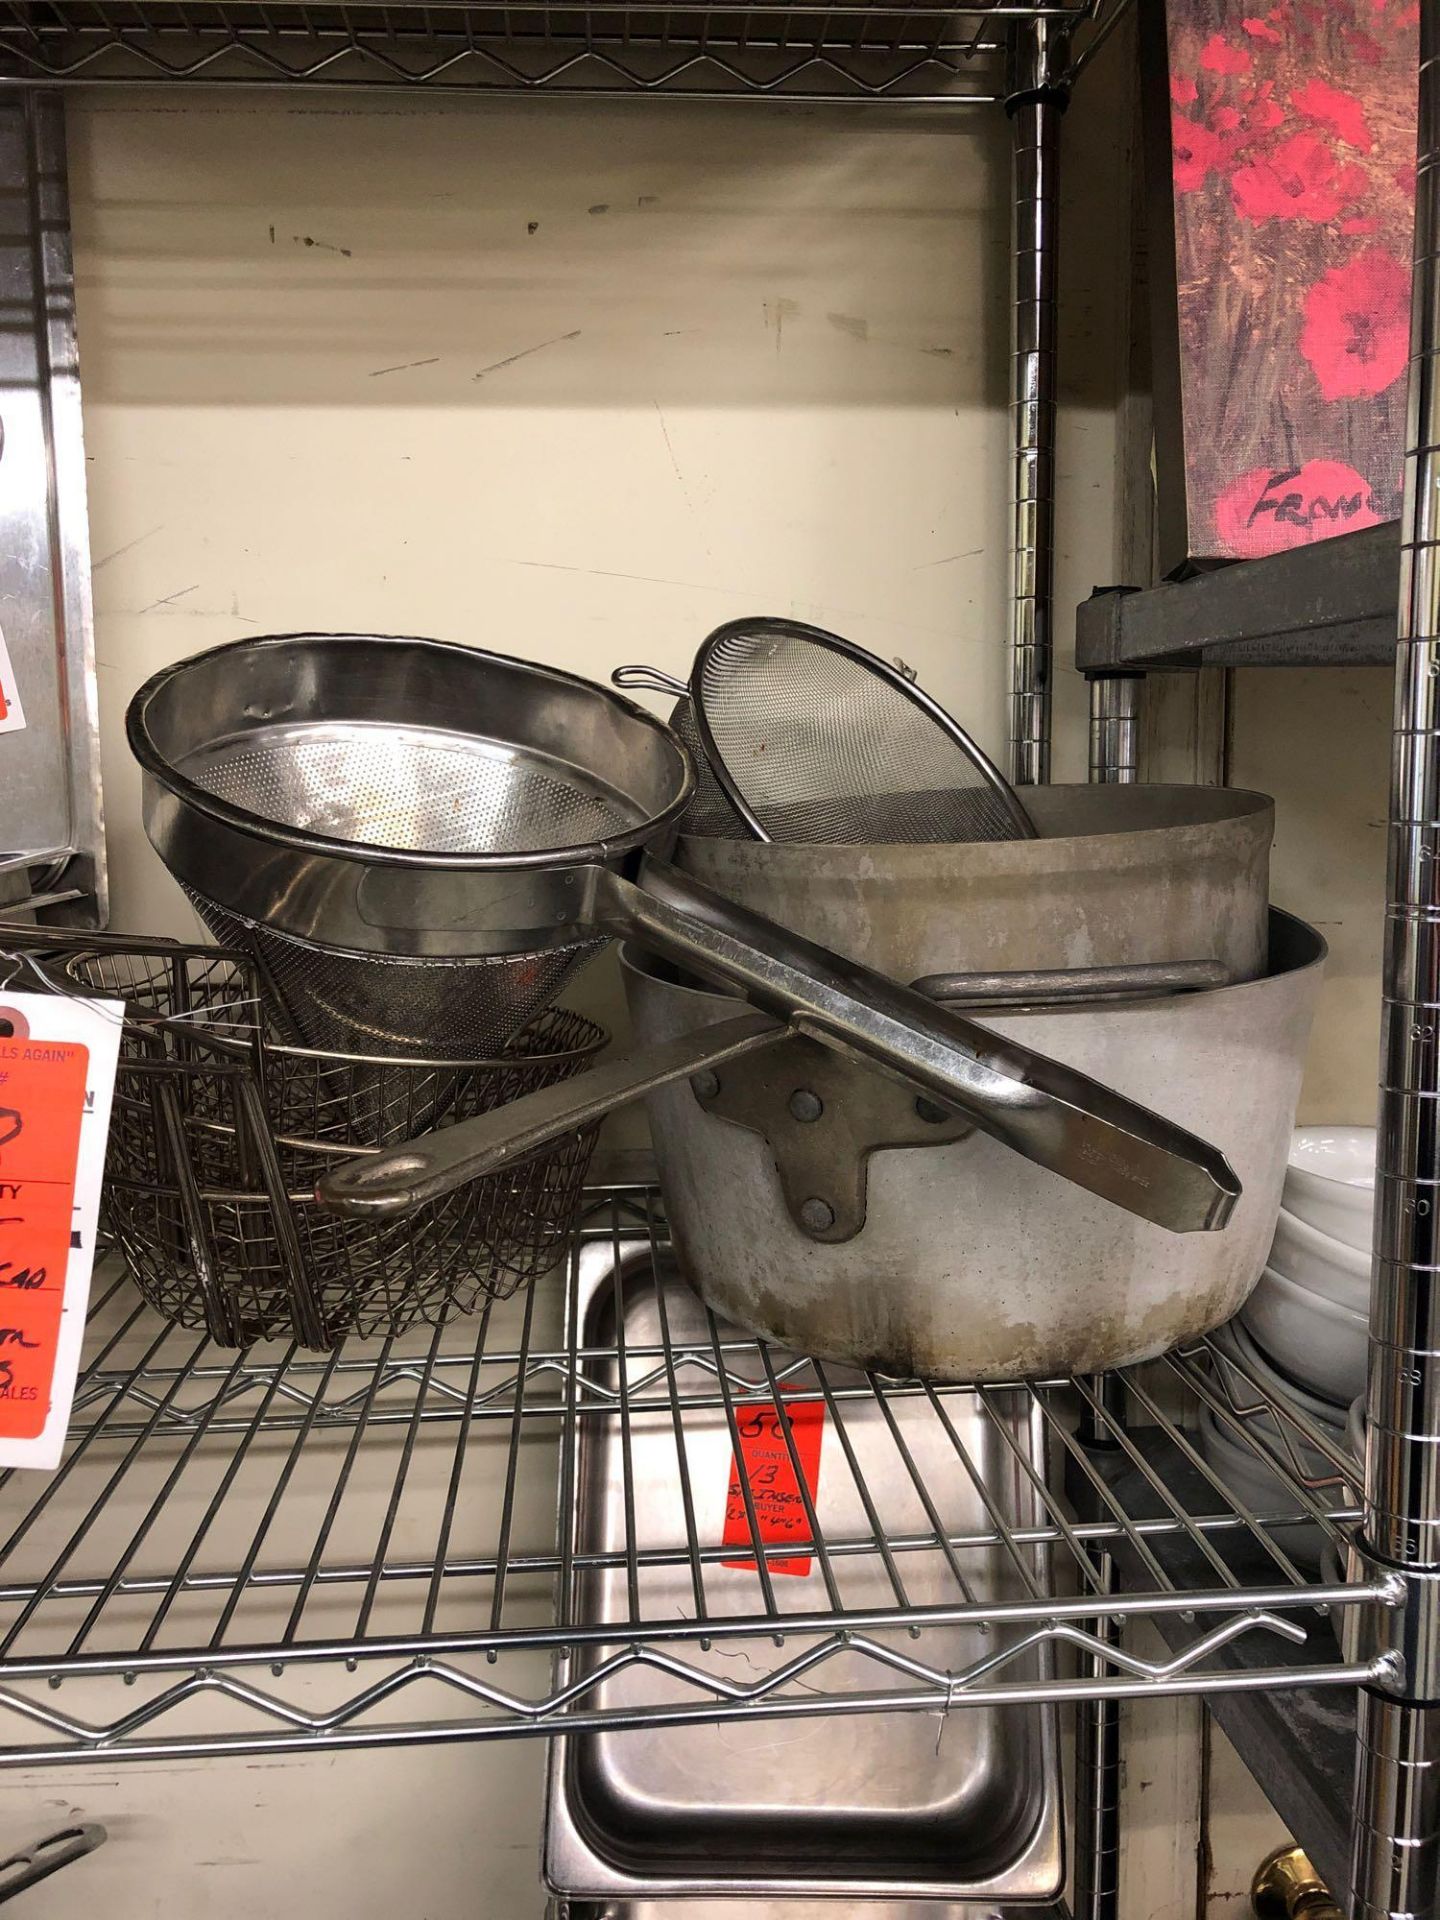 Lot assorted pans and strainers